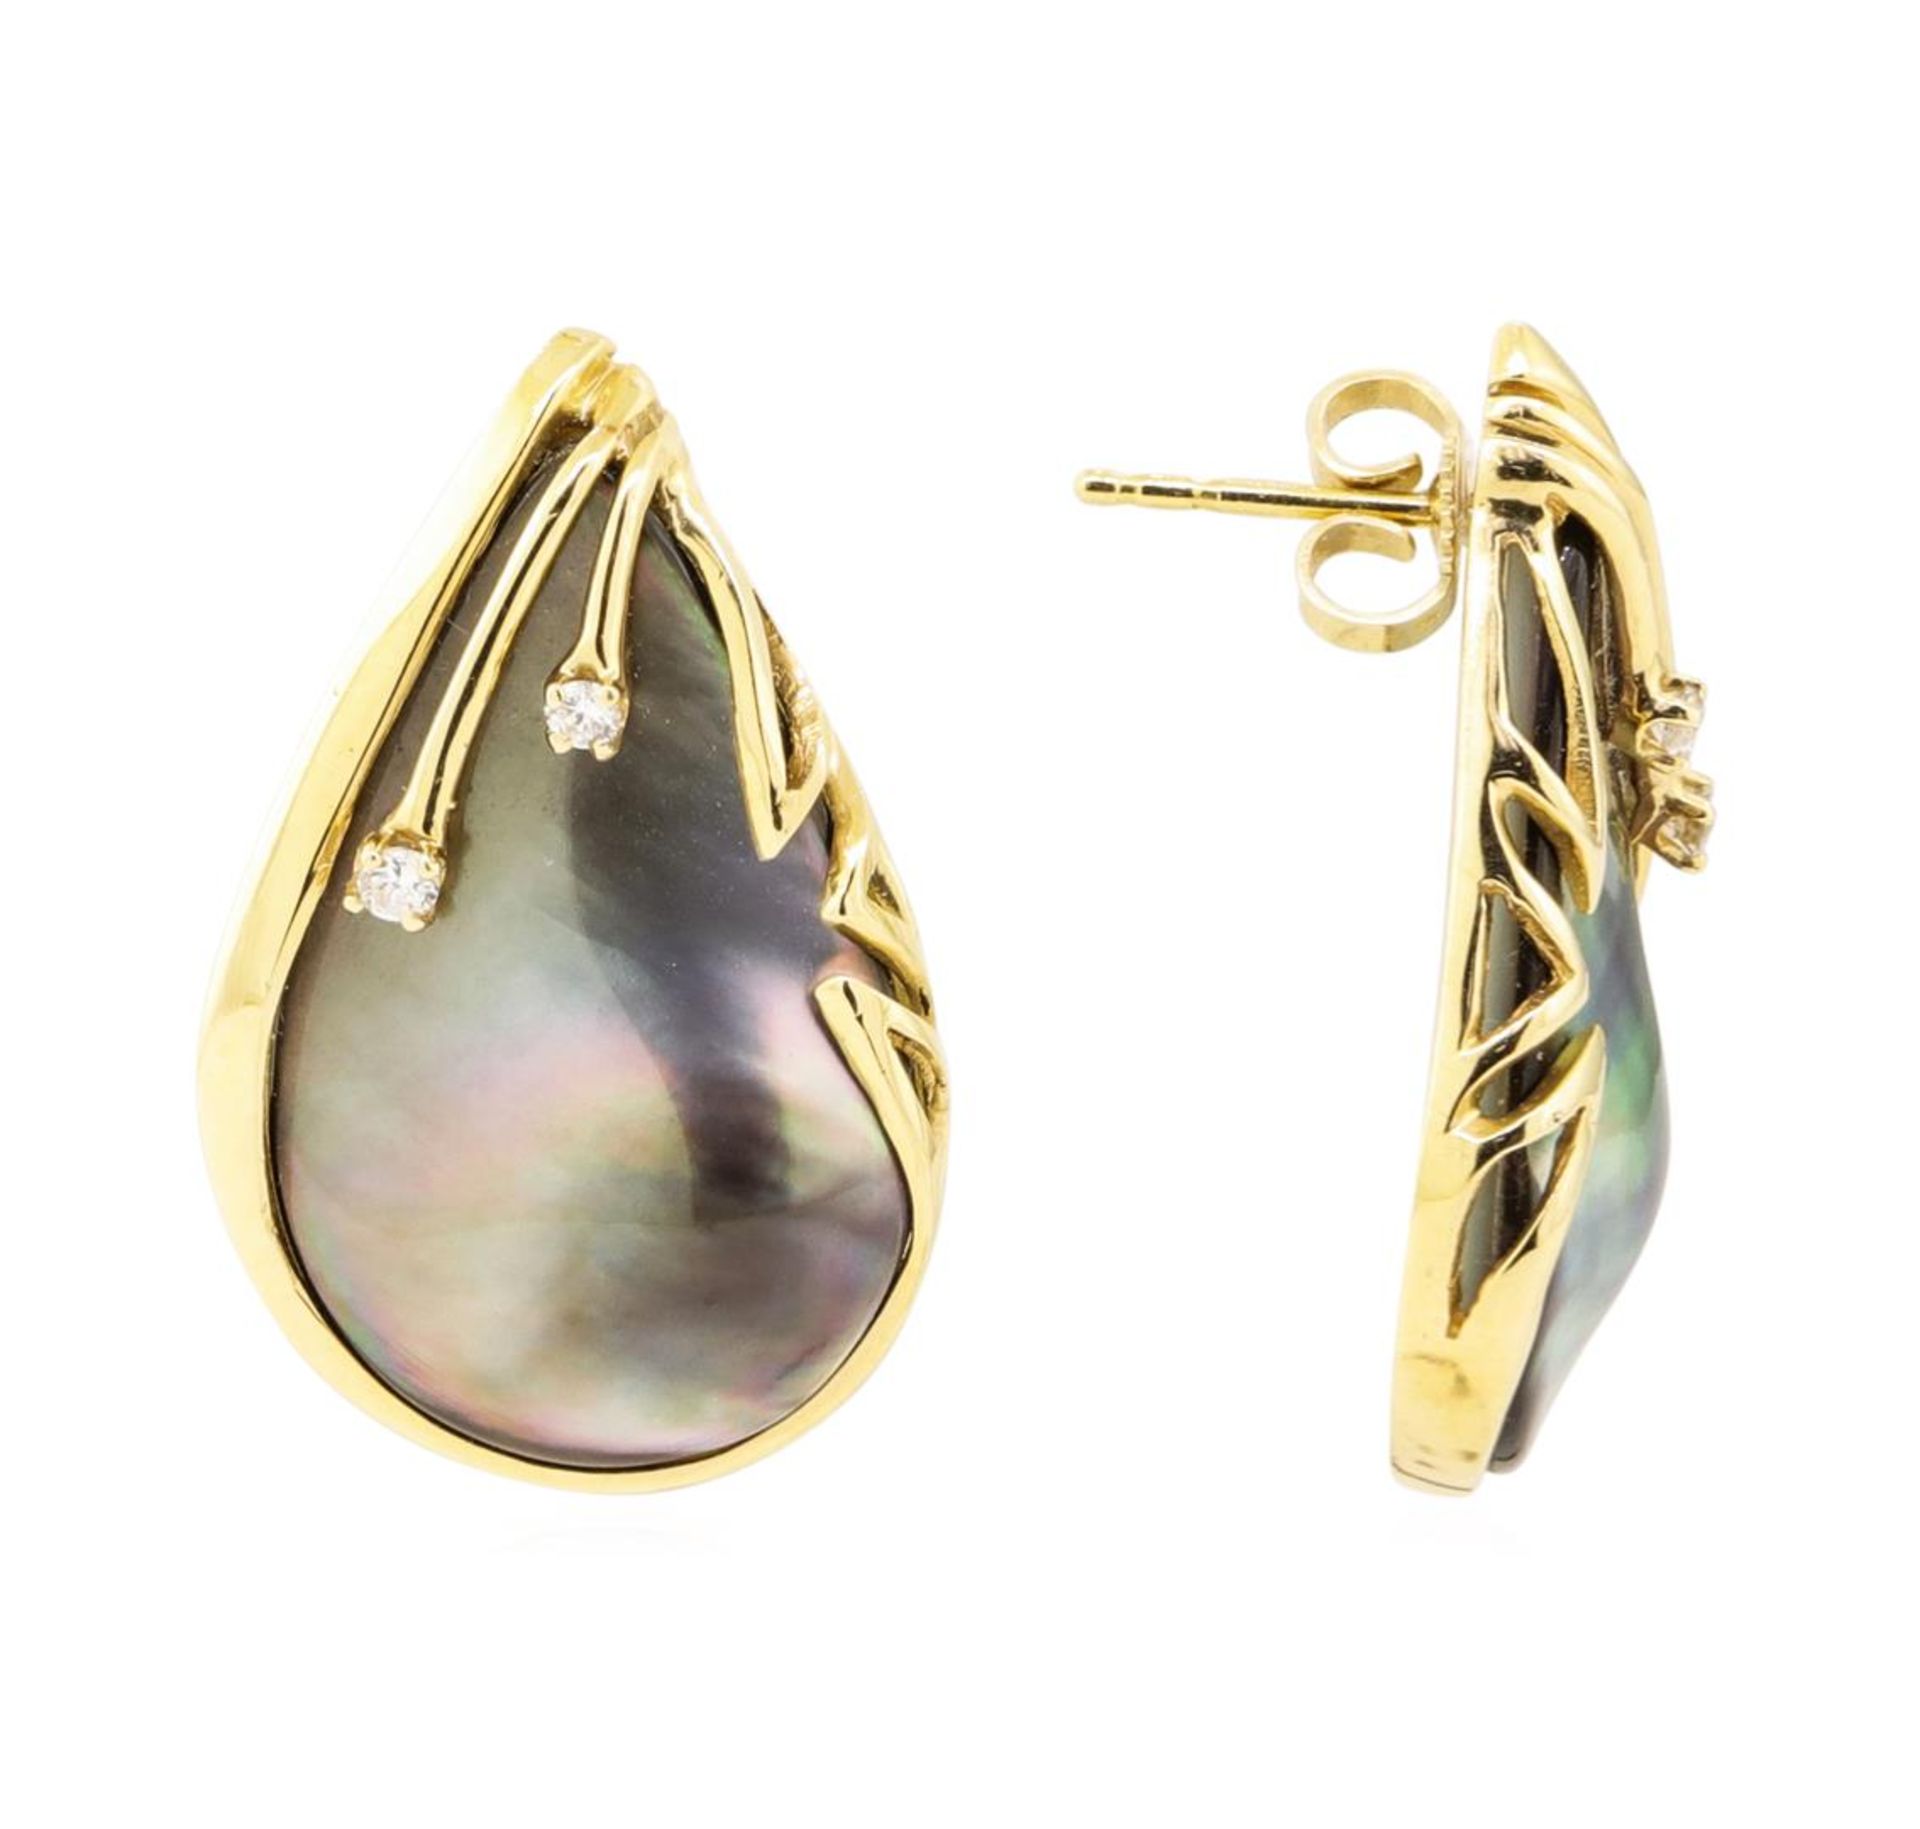 0.10 ctw Diamond and Black Mother of Pearl Teardrop Earrings - 14KT Yellow Gold - Image 2 of 2